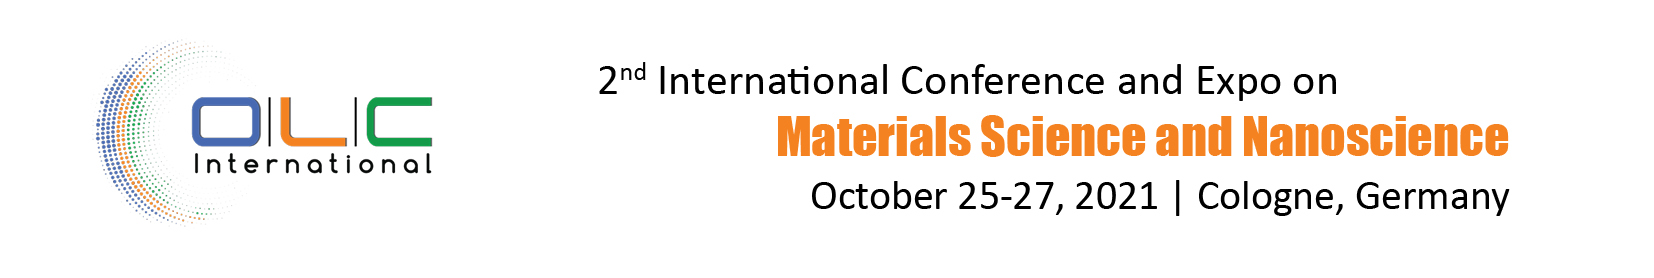 2nd International Conference and Expo on Materials Science and Nanoscience